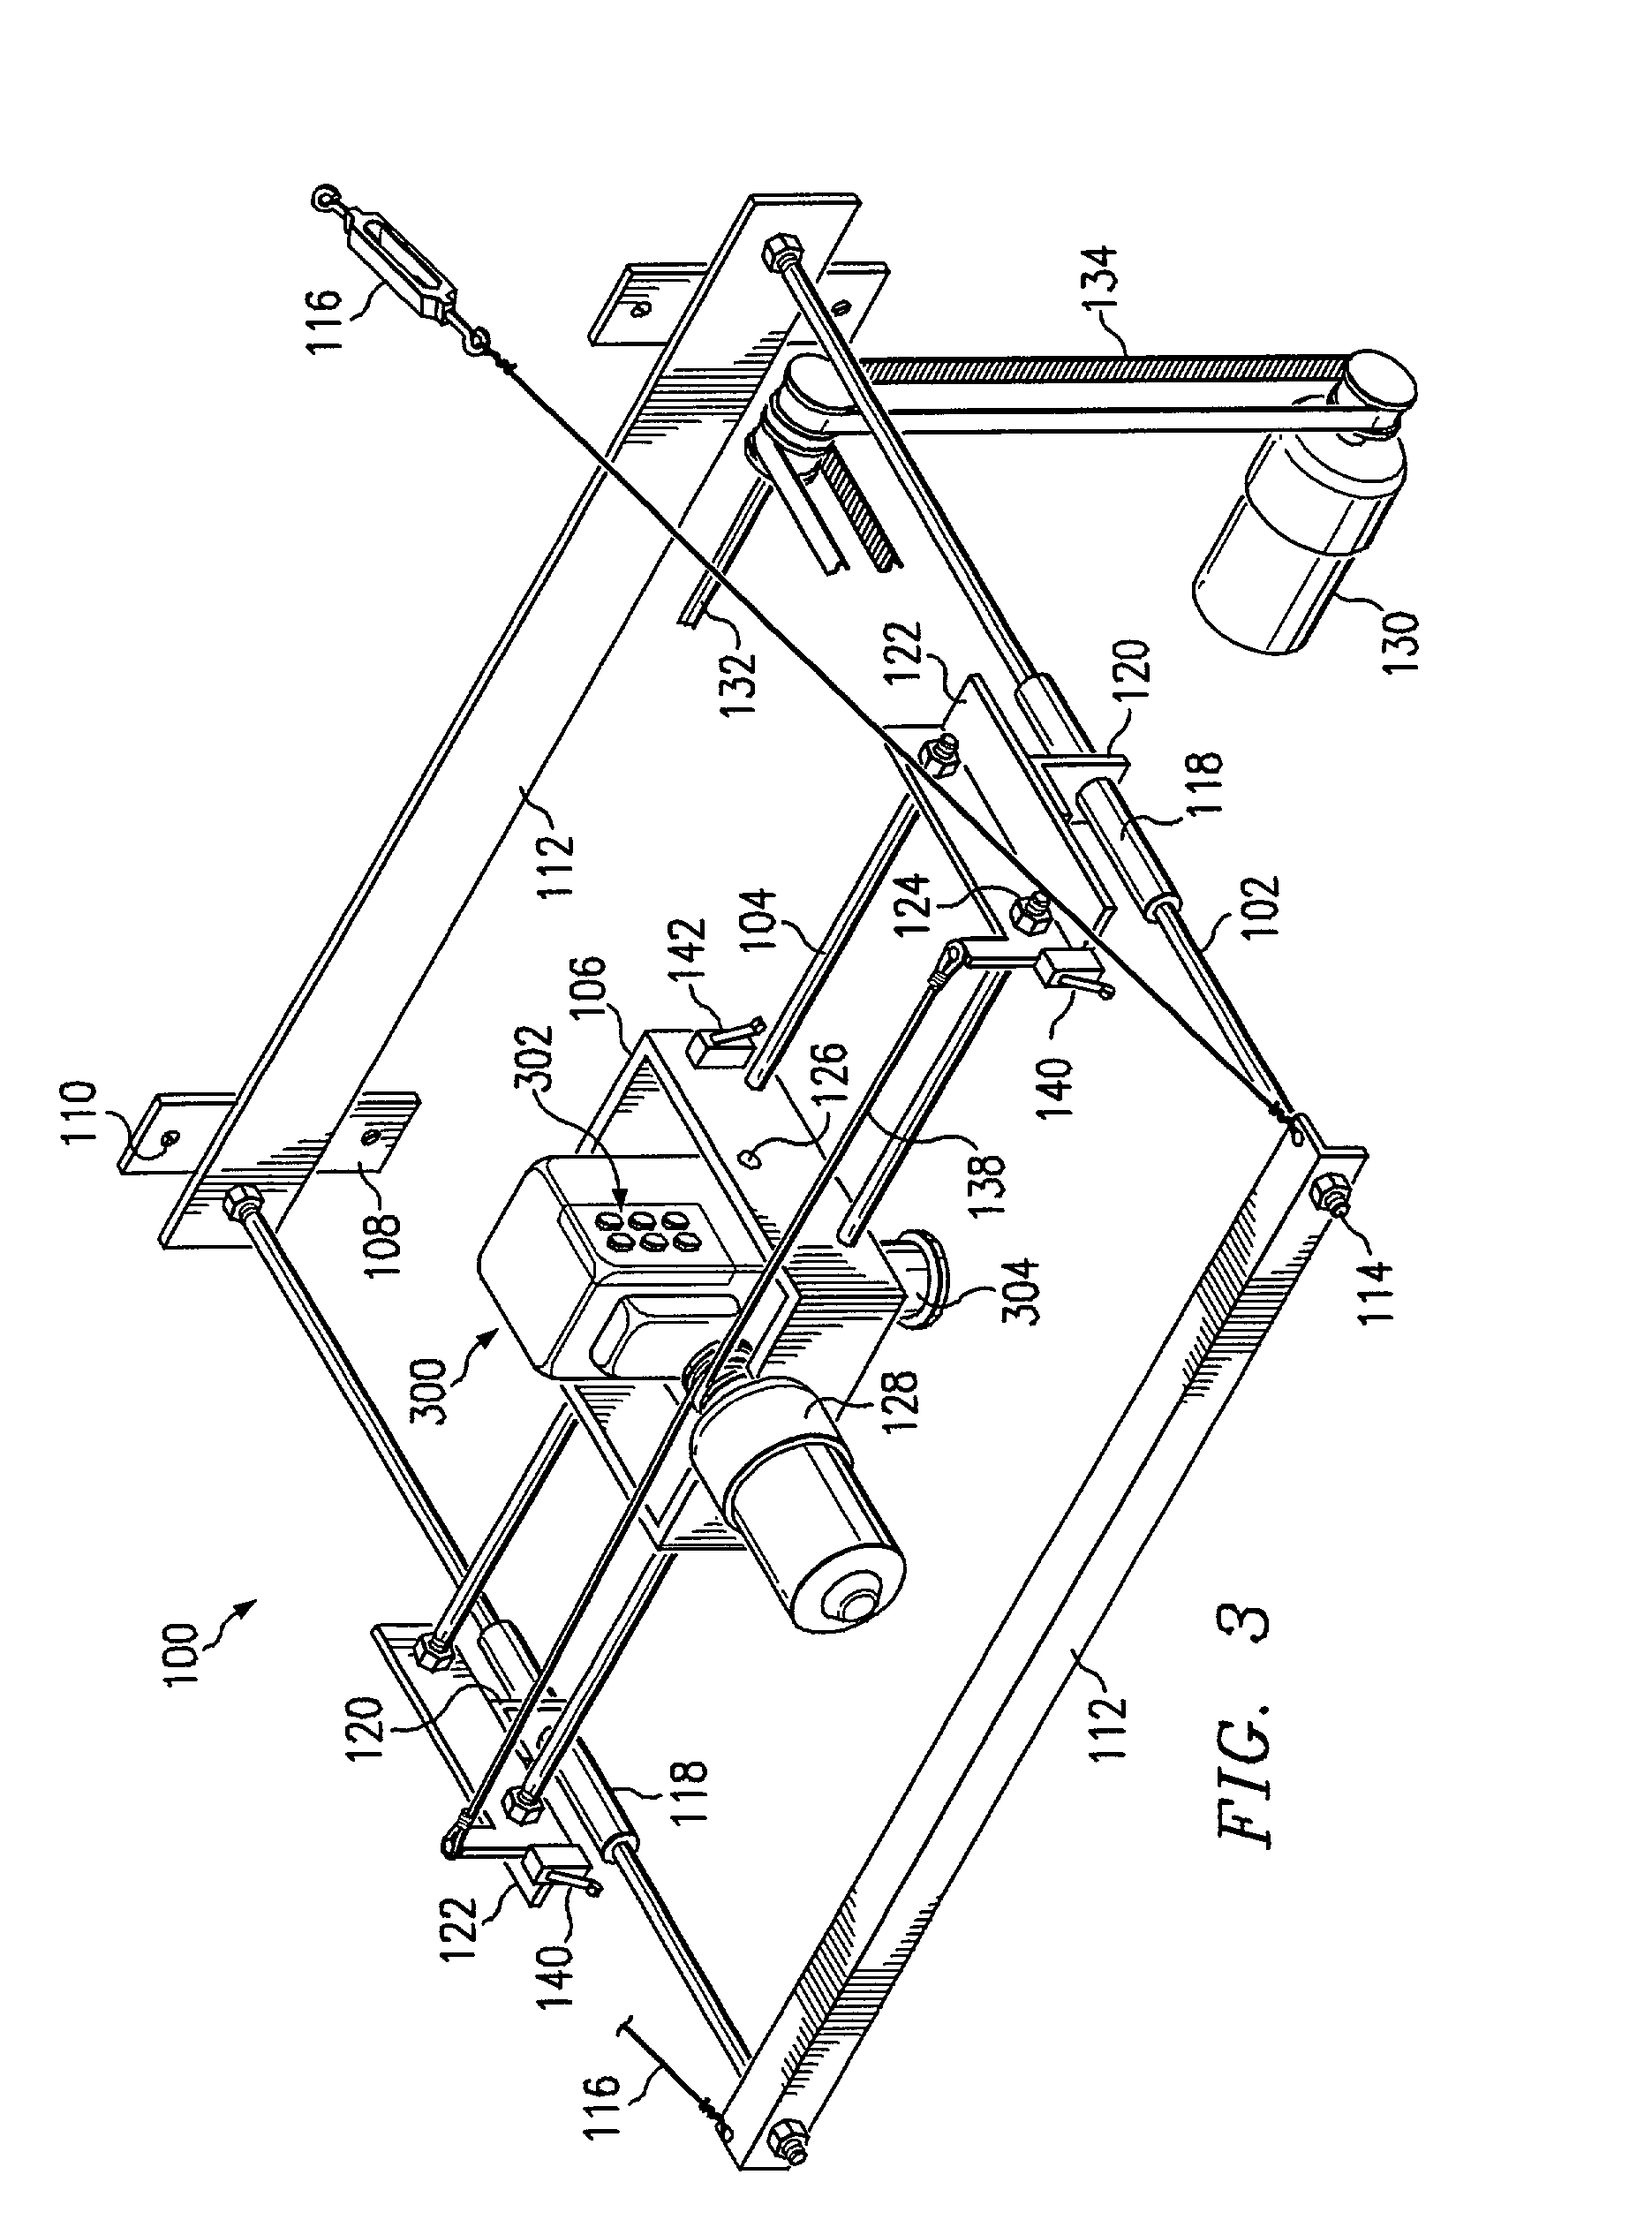 X-Y video camera support and positioning system